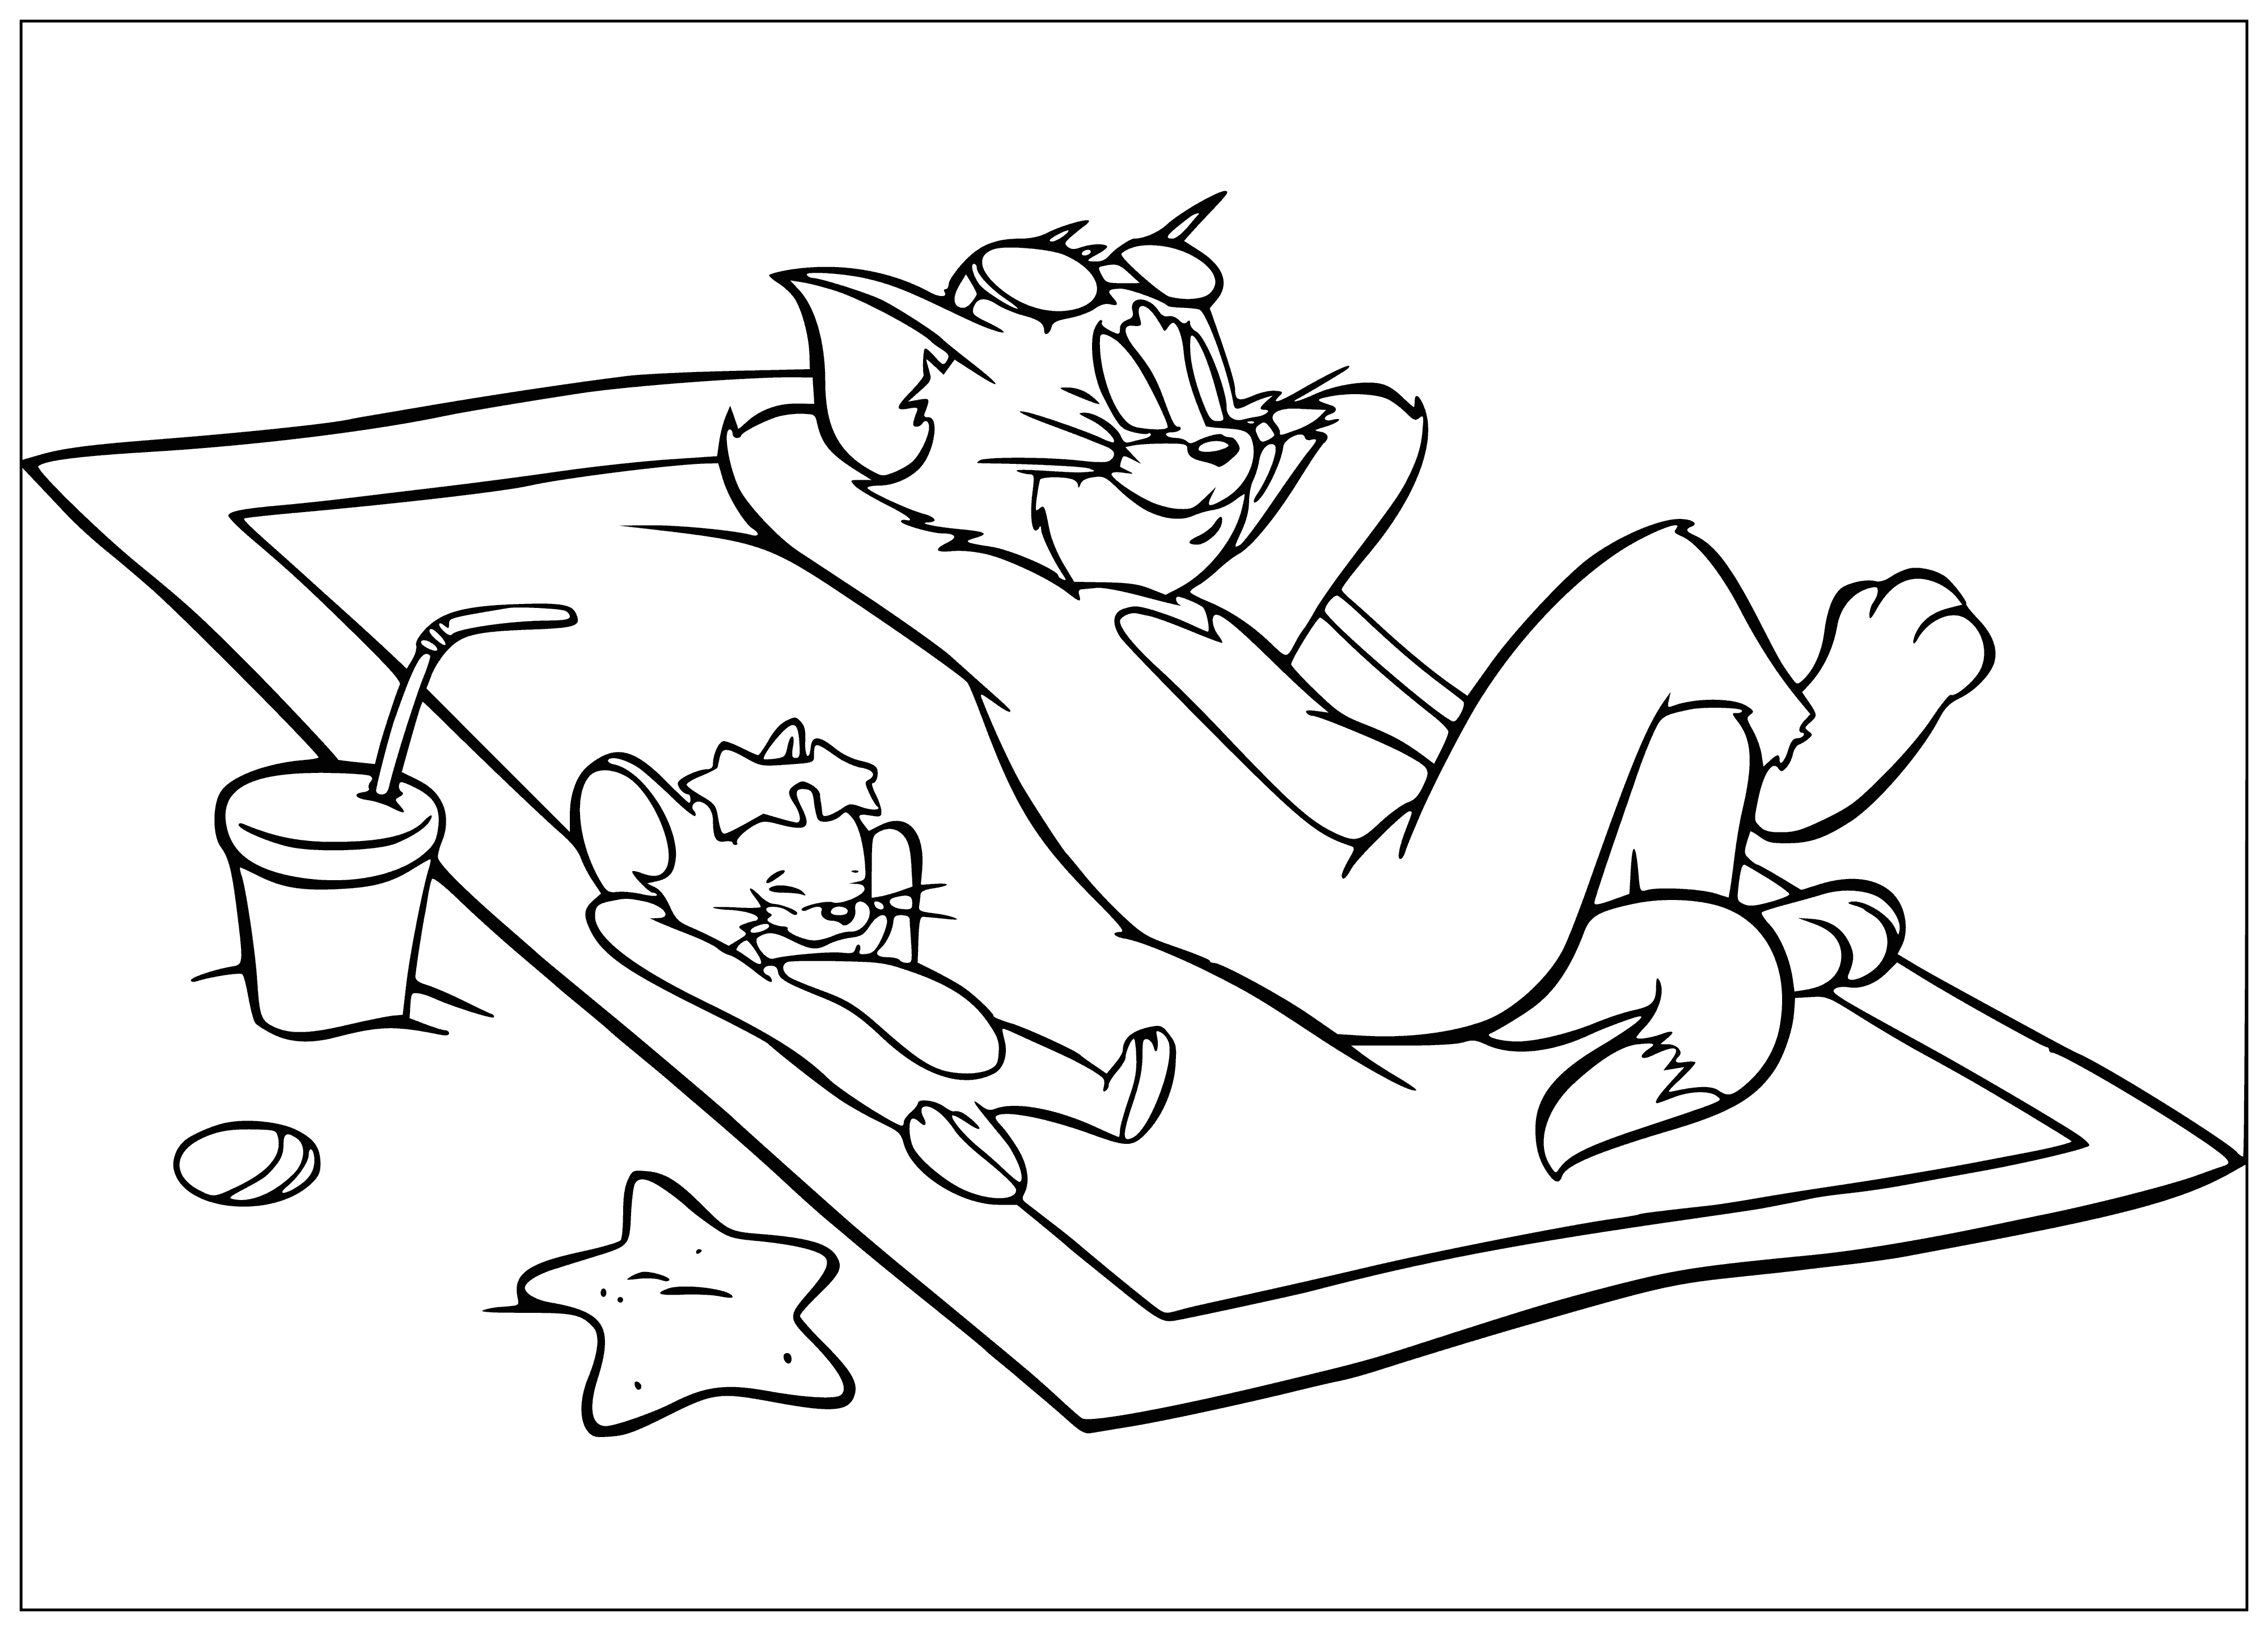 coloring page: Tom and Jerry are at the beach, looking at each other from the water and the sand.